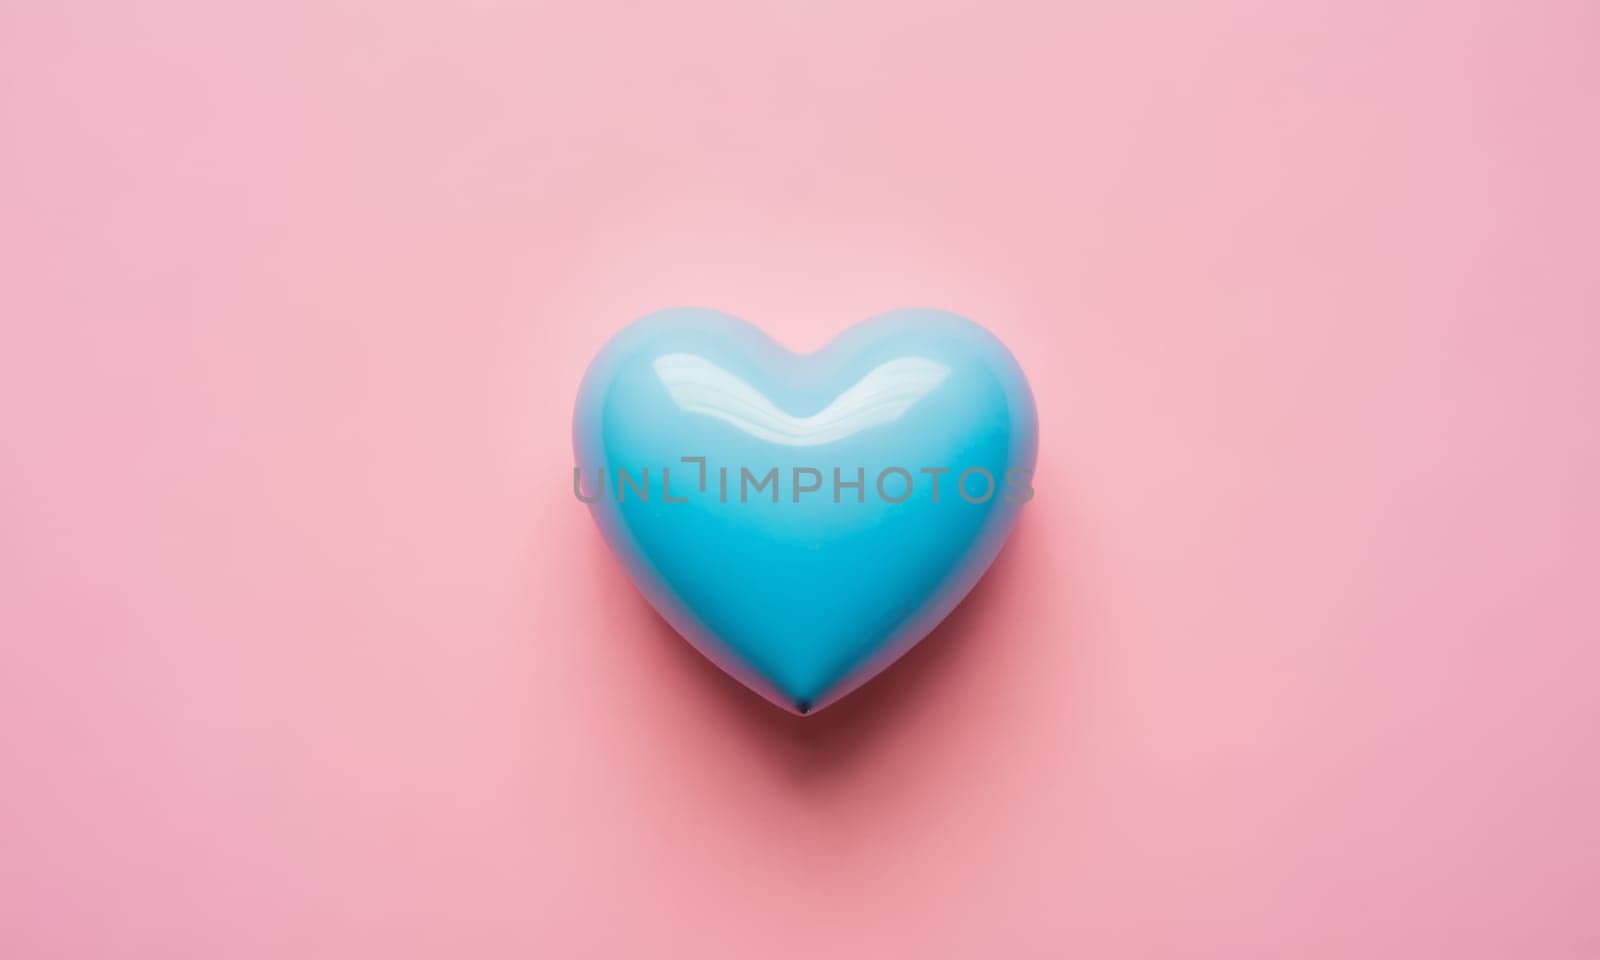 Glossy heart on a bright background. Blue and pink pastel colors by Andre1ns